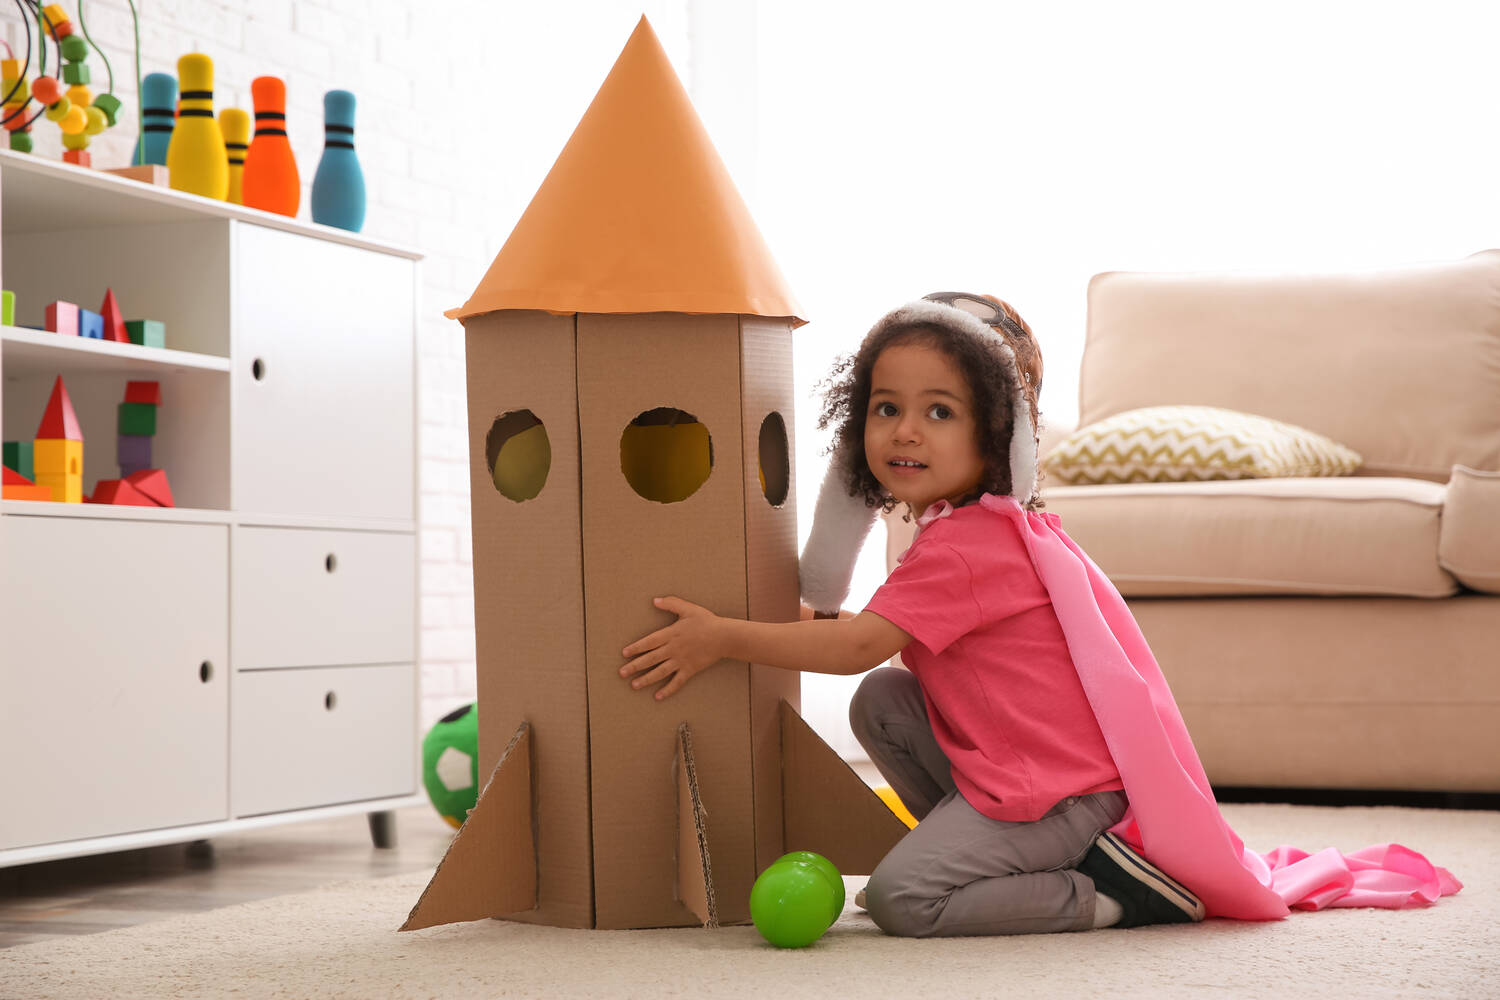 Props can trigger toddler's imagination into using them creatively